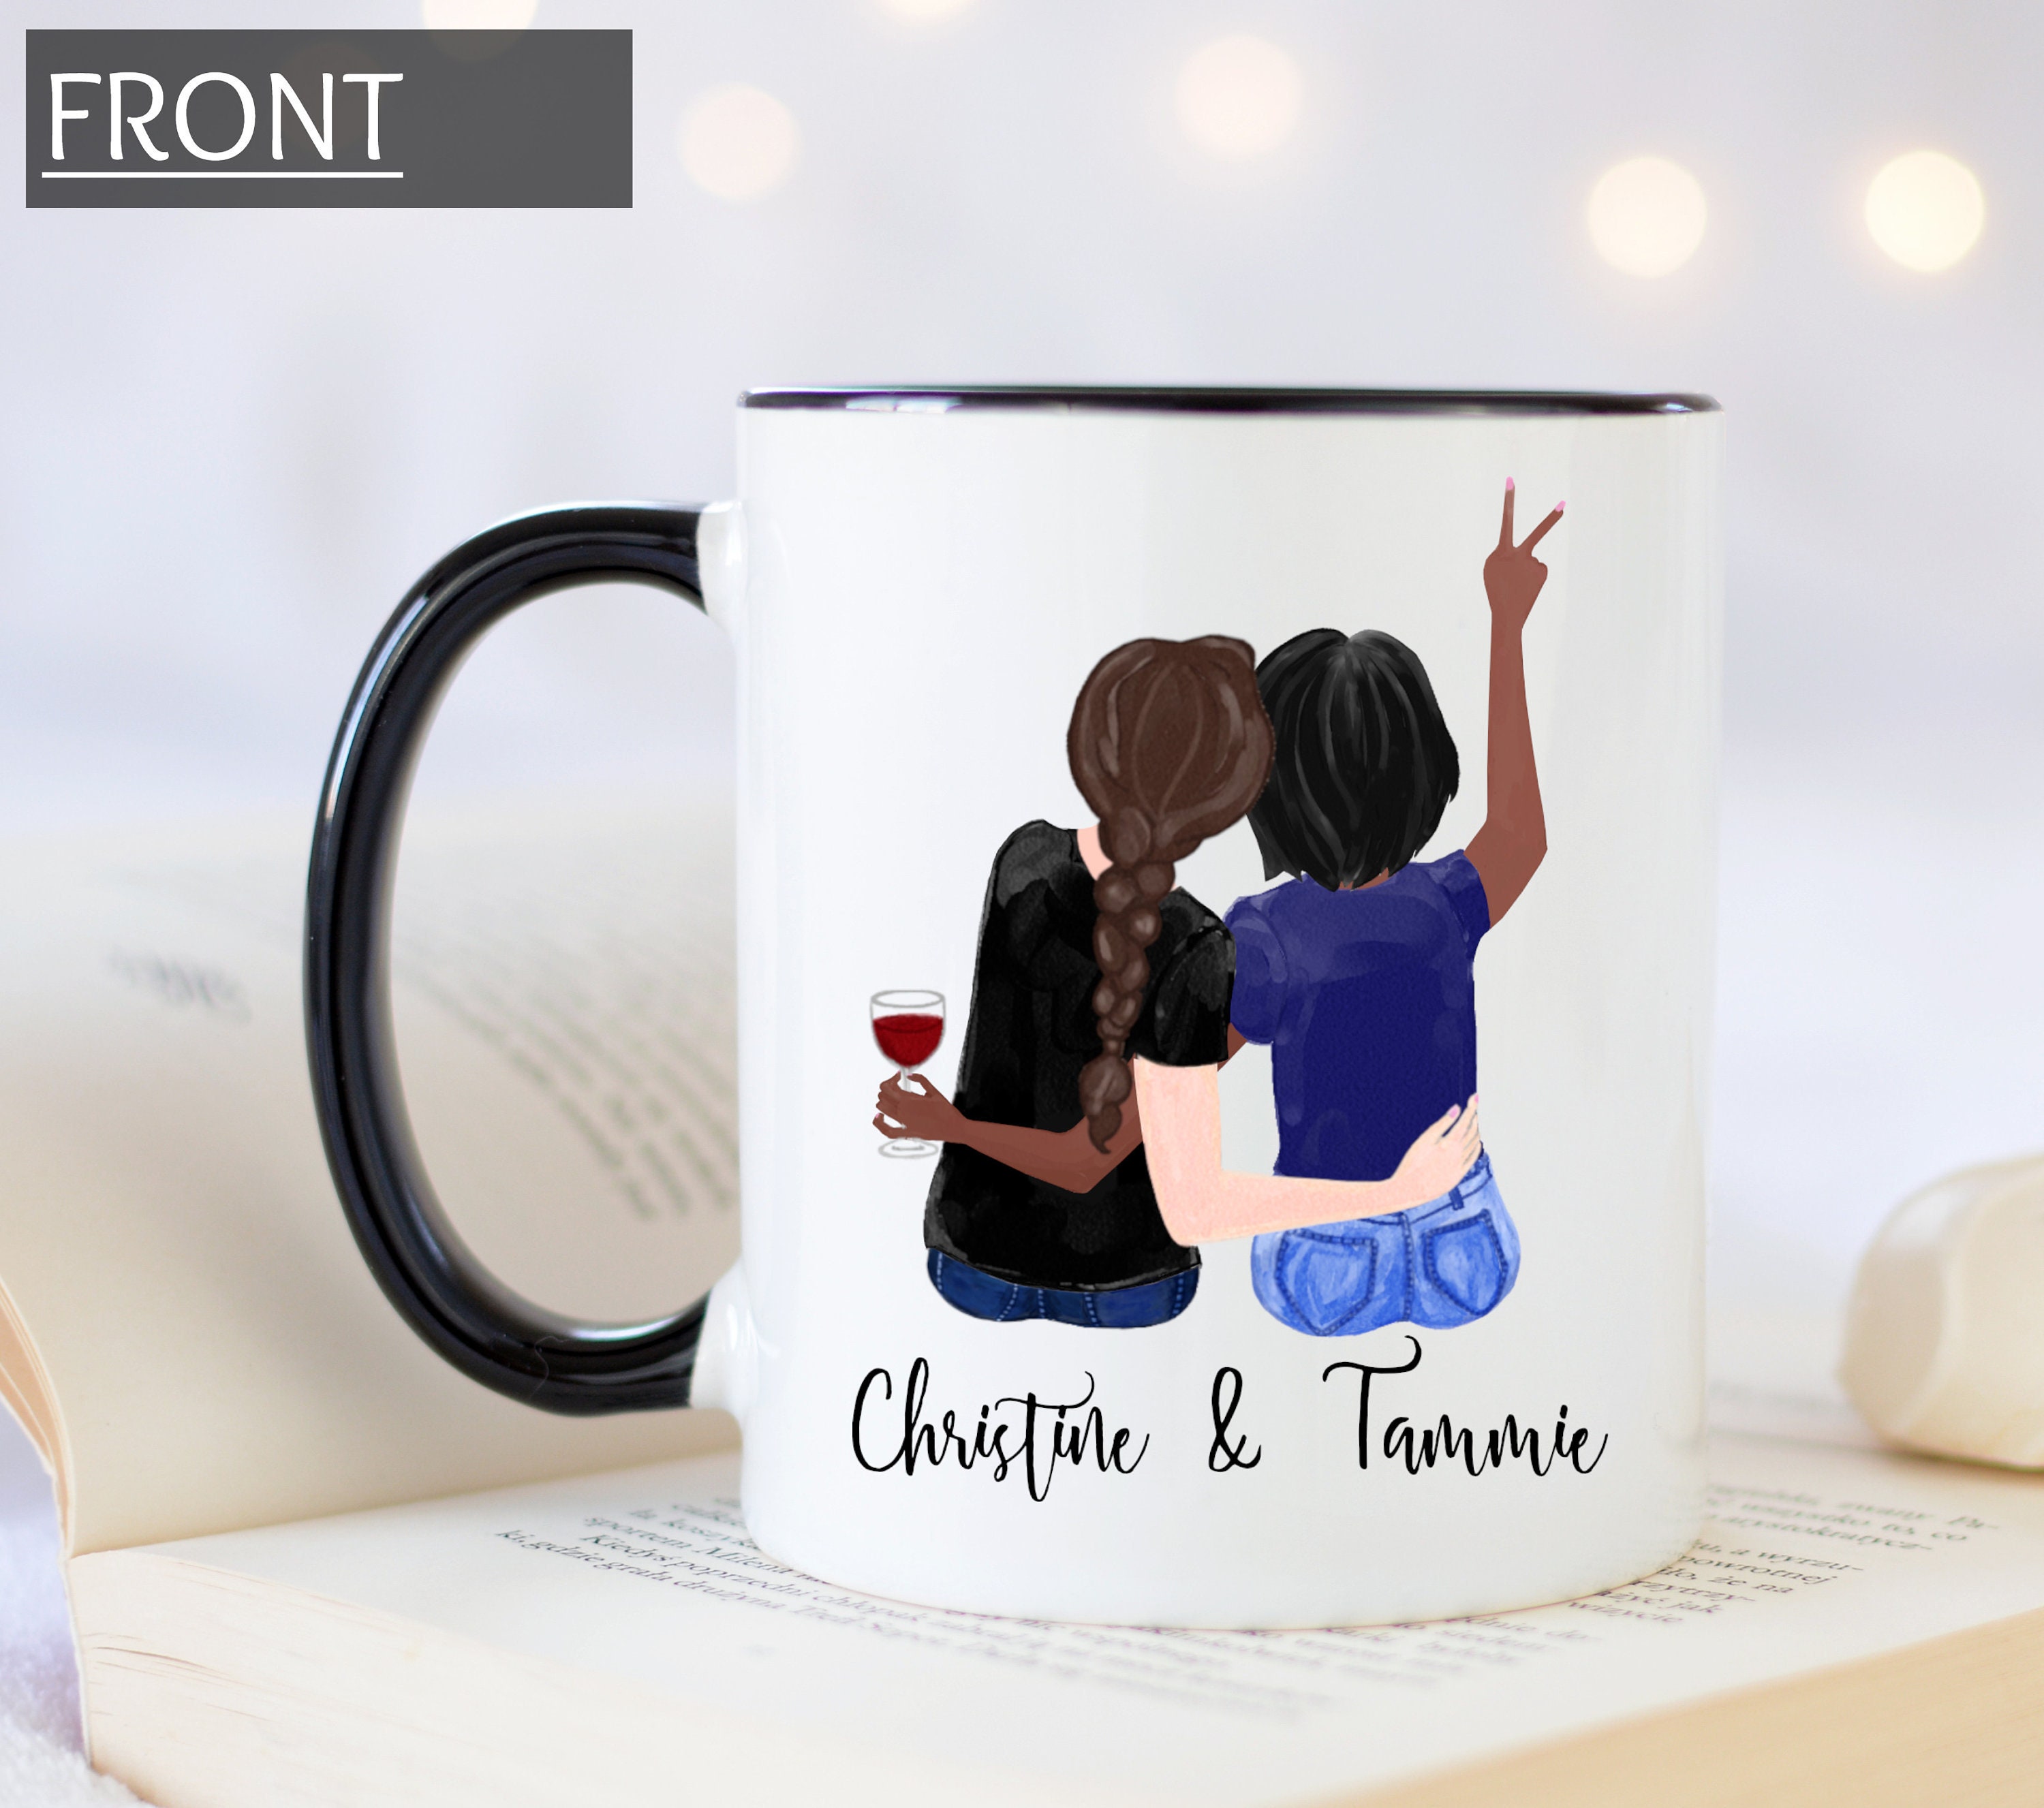 Custom Best Friend Mugs for Women, Choose Name Personalized Friendship  Coffee Mug for Bestie BFF, Galantine's Day Gift, Long Distance Friendship